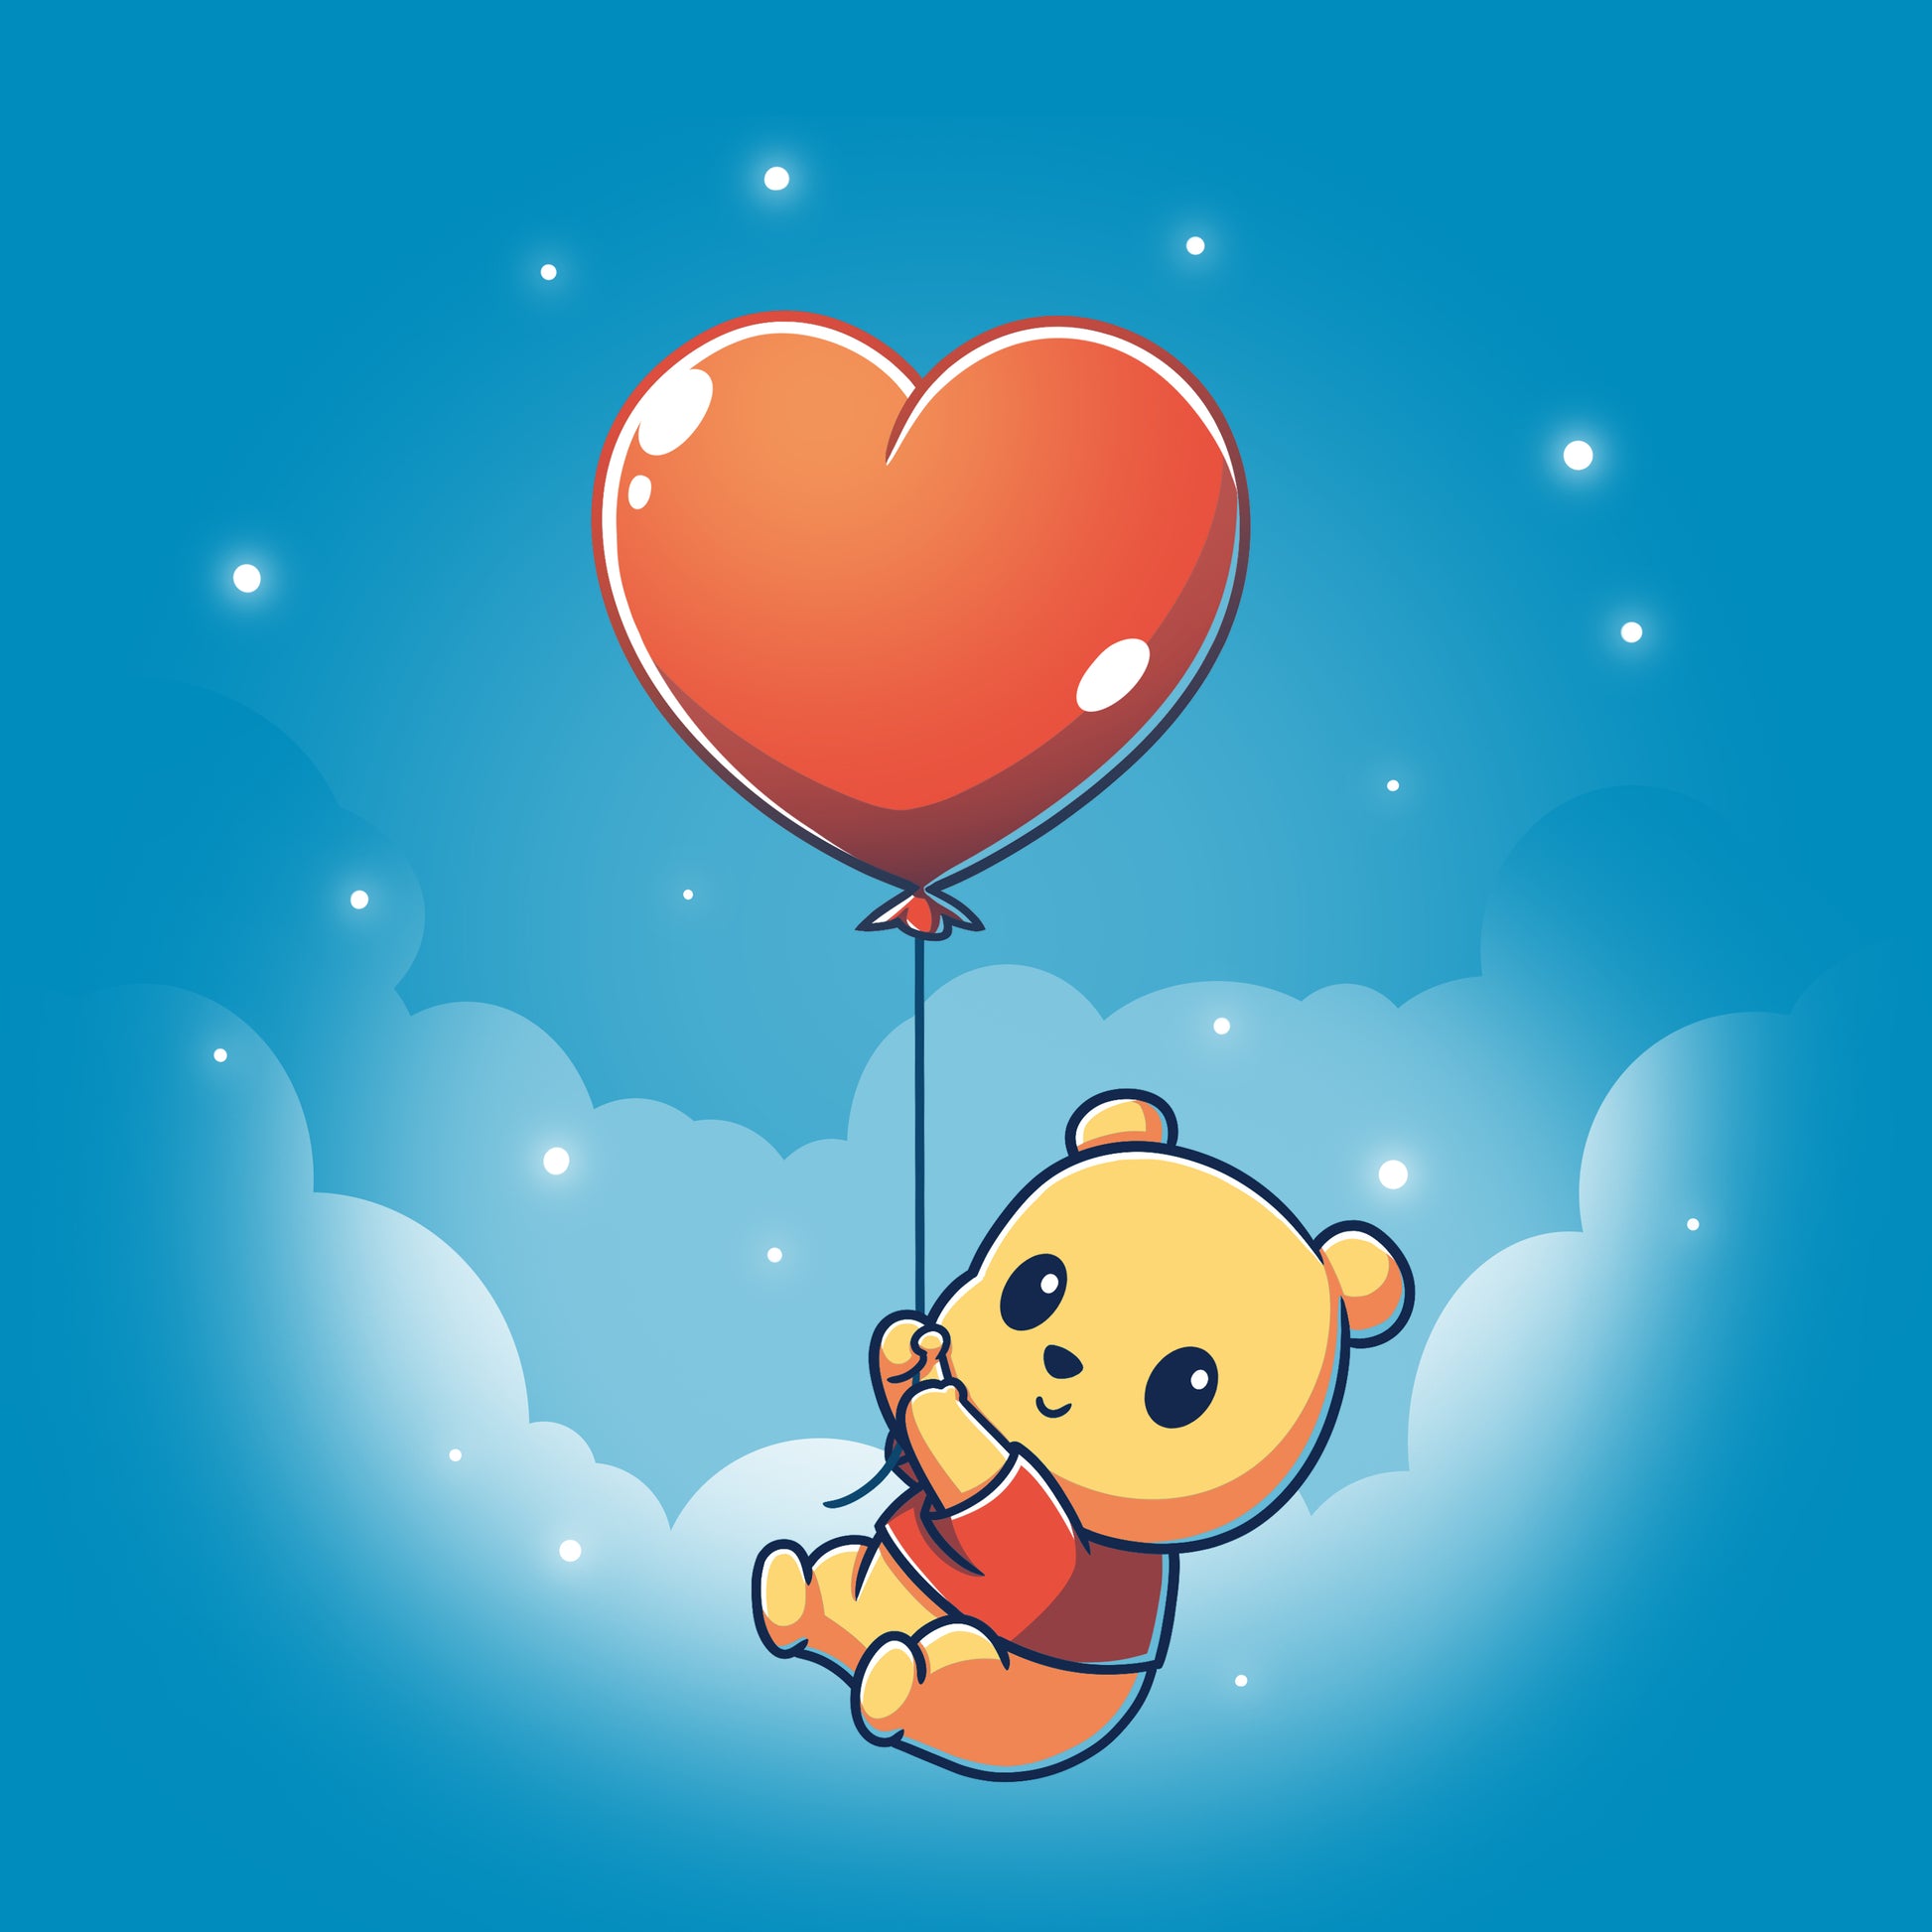 An officially licensed Disney Winnie the Pooh teddy bear holding Pooh's Red Balloon in the sky.